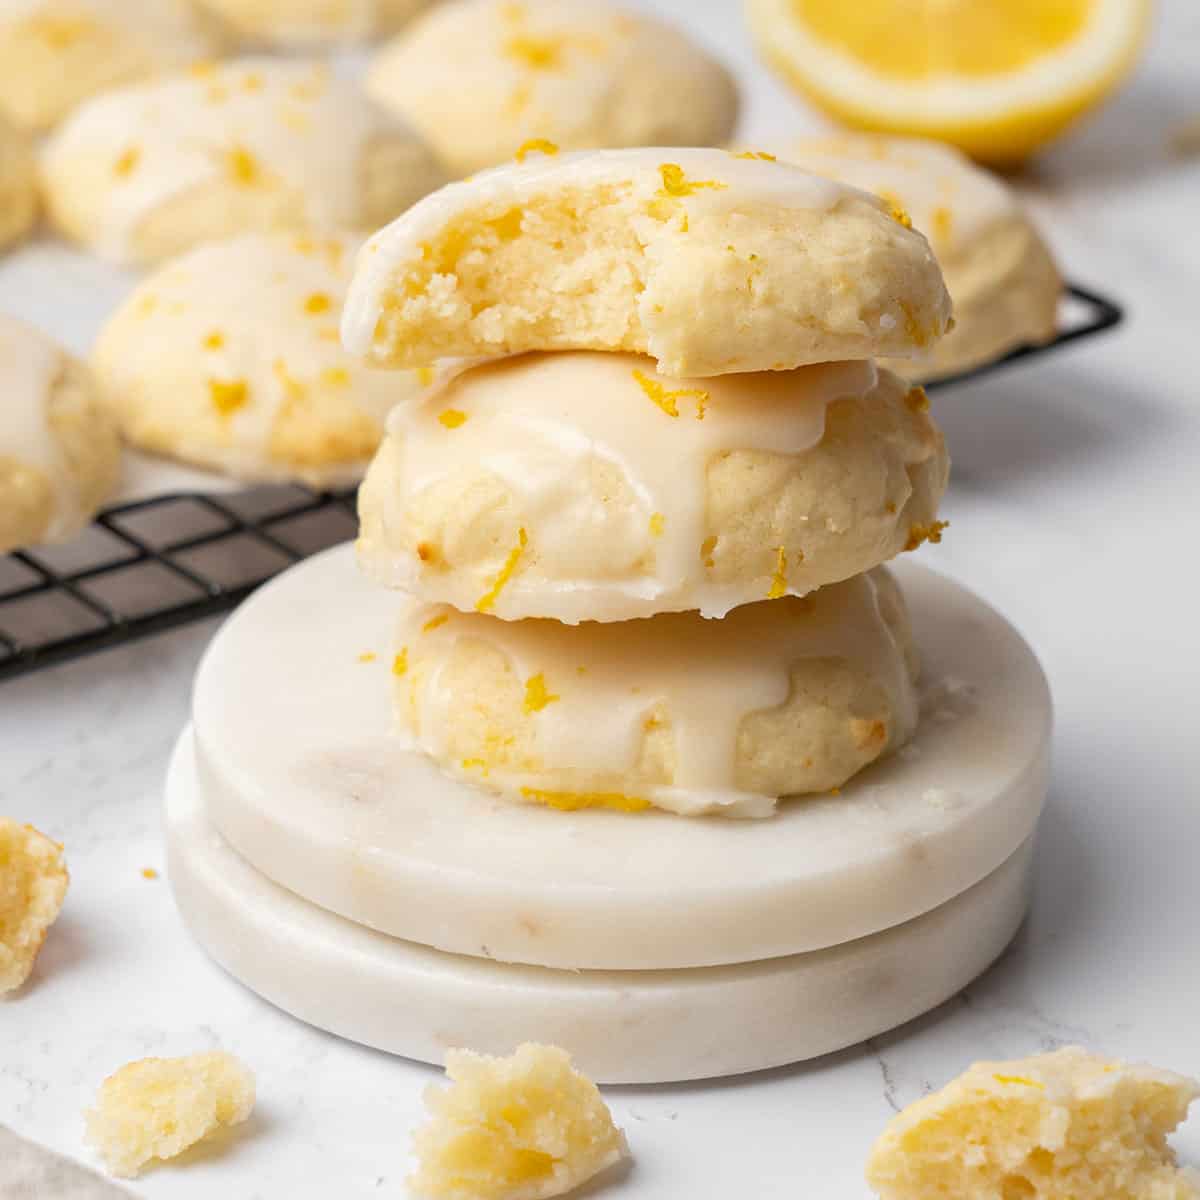 <p>Brighten up your world with a burst of citrusy bliss with these easy-to-make and delectably delicious<strong> <a href="https://www.spatuladesserts.com/lemon-ricotta-cookies/">Italian Lemon Ricotta Cookies</a></strong>! With their soft melt-in-your-mouth texture and perfect balance of tangy to sweet, these lemon cookies are a true delight!</p> <p><strong>Go to the recipe: <a href="http://Brighten%20up%20your%20world%20with%20a%20burst%20of%20citrusy%20bliss%20with%20these%20easy-to-make%20and%20delectably%20delicious%20Italian%20Lemon%20Ricotta%20Cookies!%20With%20their%20soft%20melt-in-your-mouth%20texture%20and%20perfect%20balance%20of%20tangy%20to%20sweet,%20these%20lemon%20cookies%20are%20a%20true%20delight!%20Whether%20you%20serve%20them%20alongside%20your%20favorite%20hot%20beverage%20or%20take%20them%20to%20your%20next%20family%20gathering,%20they%20are%20sure%20to%20be%20a%20hit!">Lemon Rico</a><a href="https://www.spatuladesserts.com/lemon-ricotta-cookies/">tta Cookies</a></strong></p>